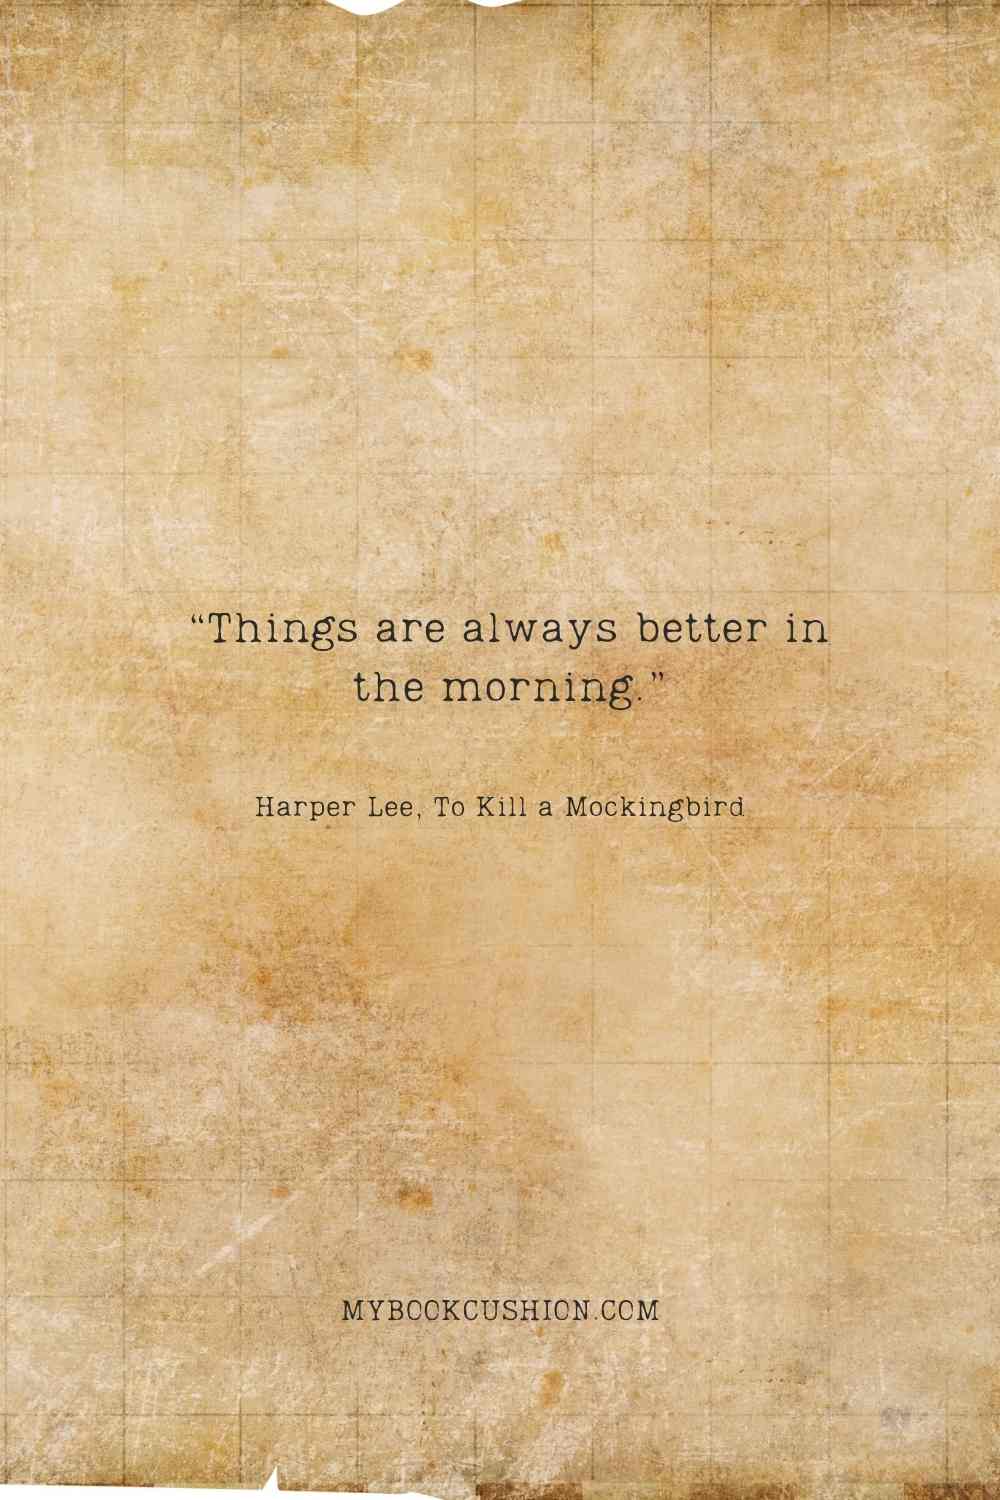 “Things are always better in the morning.” - Harper Lee, To Kill a Mockingbird